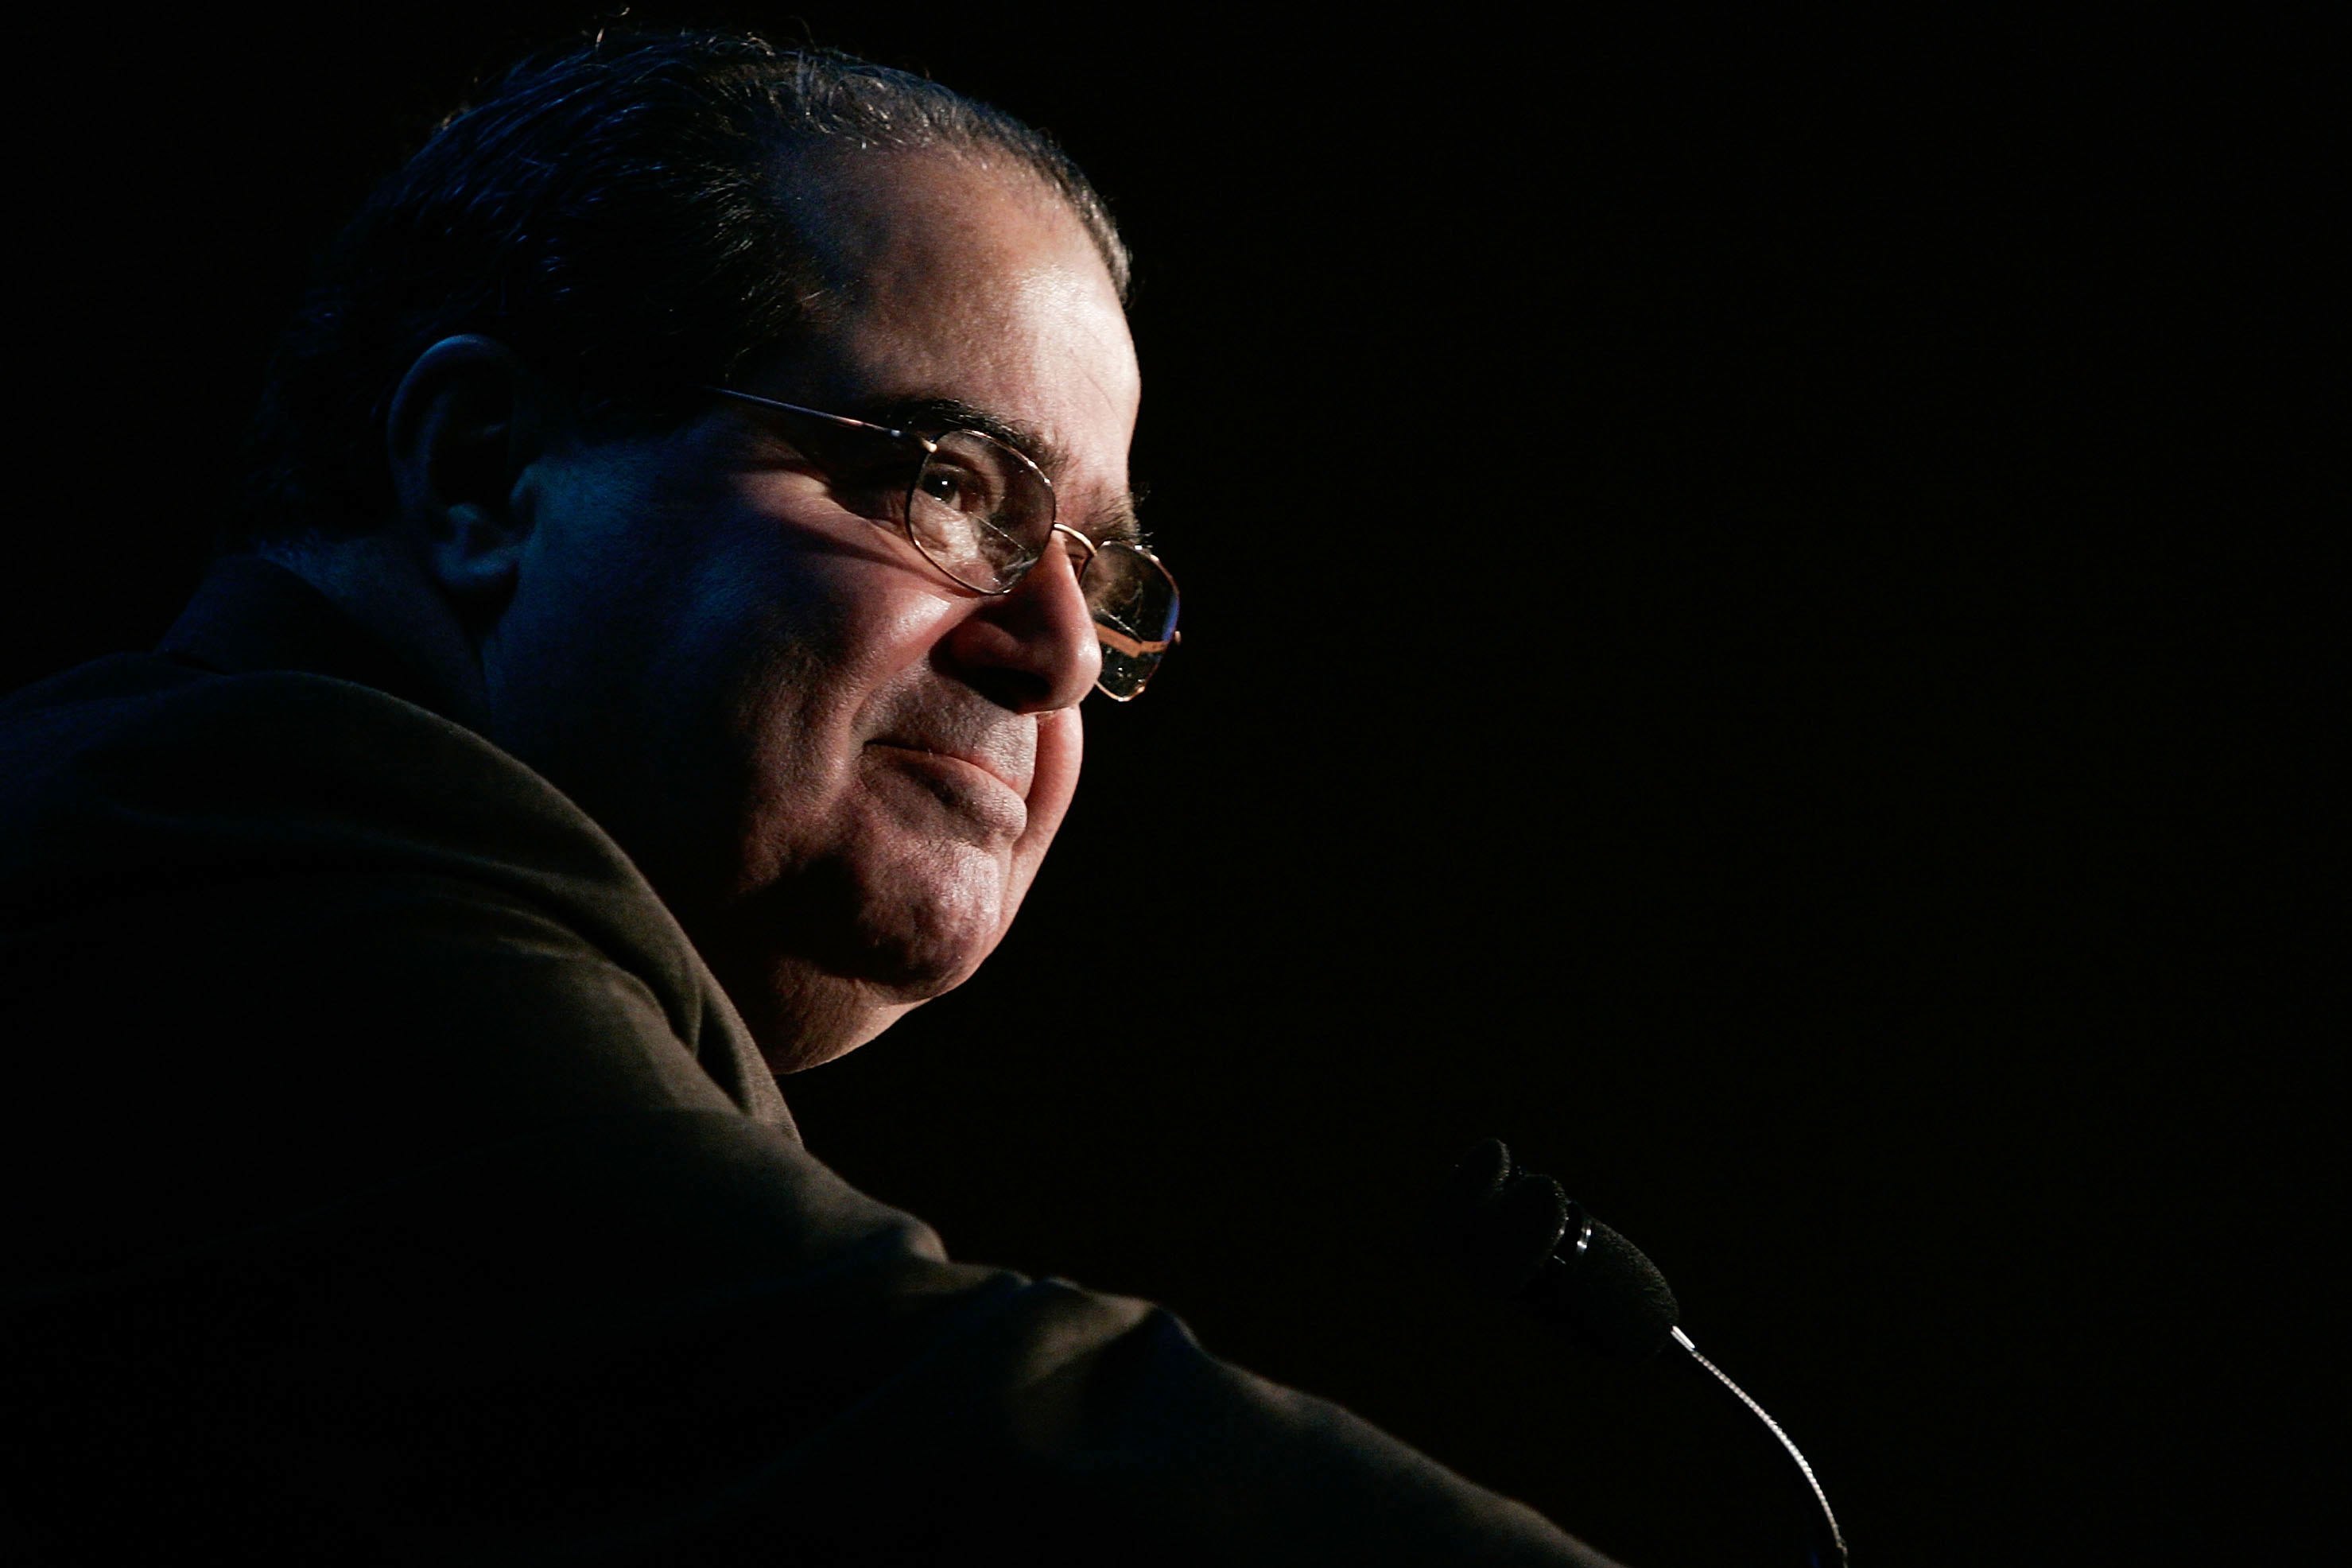 U.S. Supreme Court Associate Justice Antonin Scalia pauses as he addresses a Northern Virginia Technology Council breakfast in December 2006 in McLean, Va.